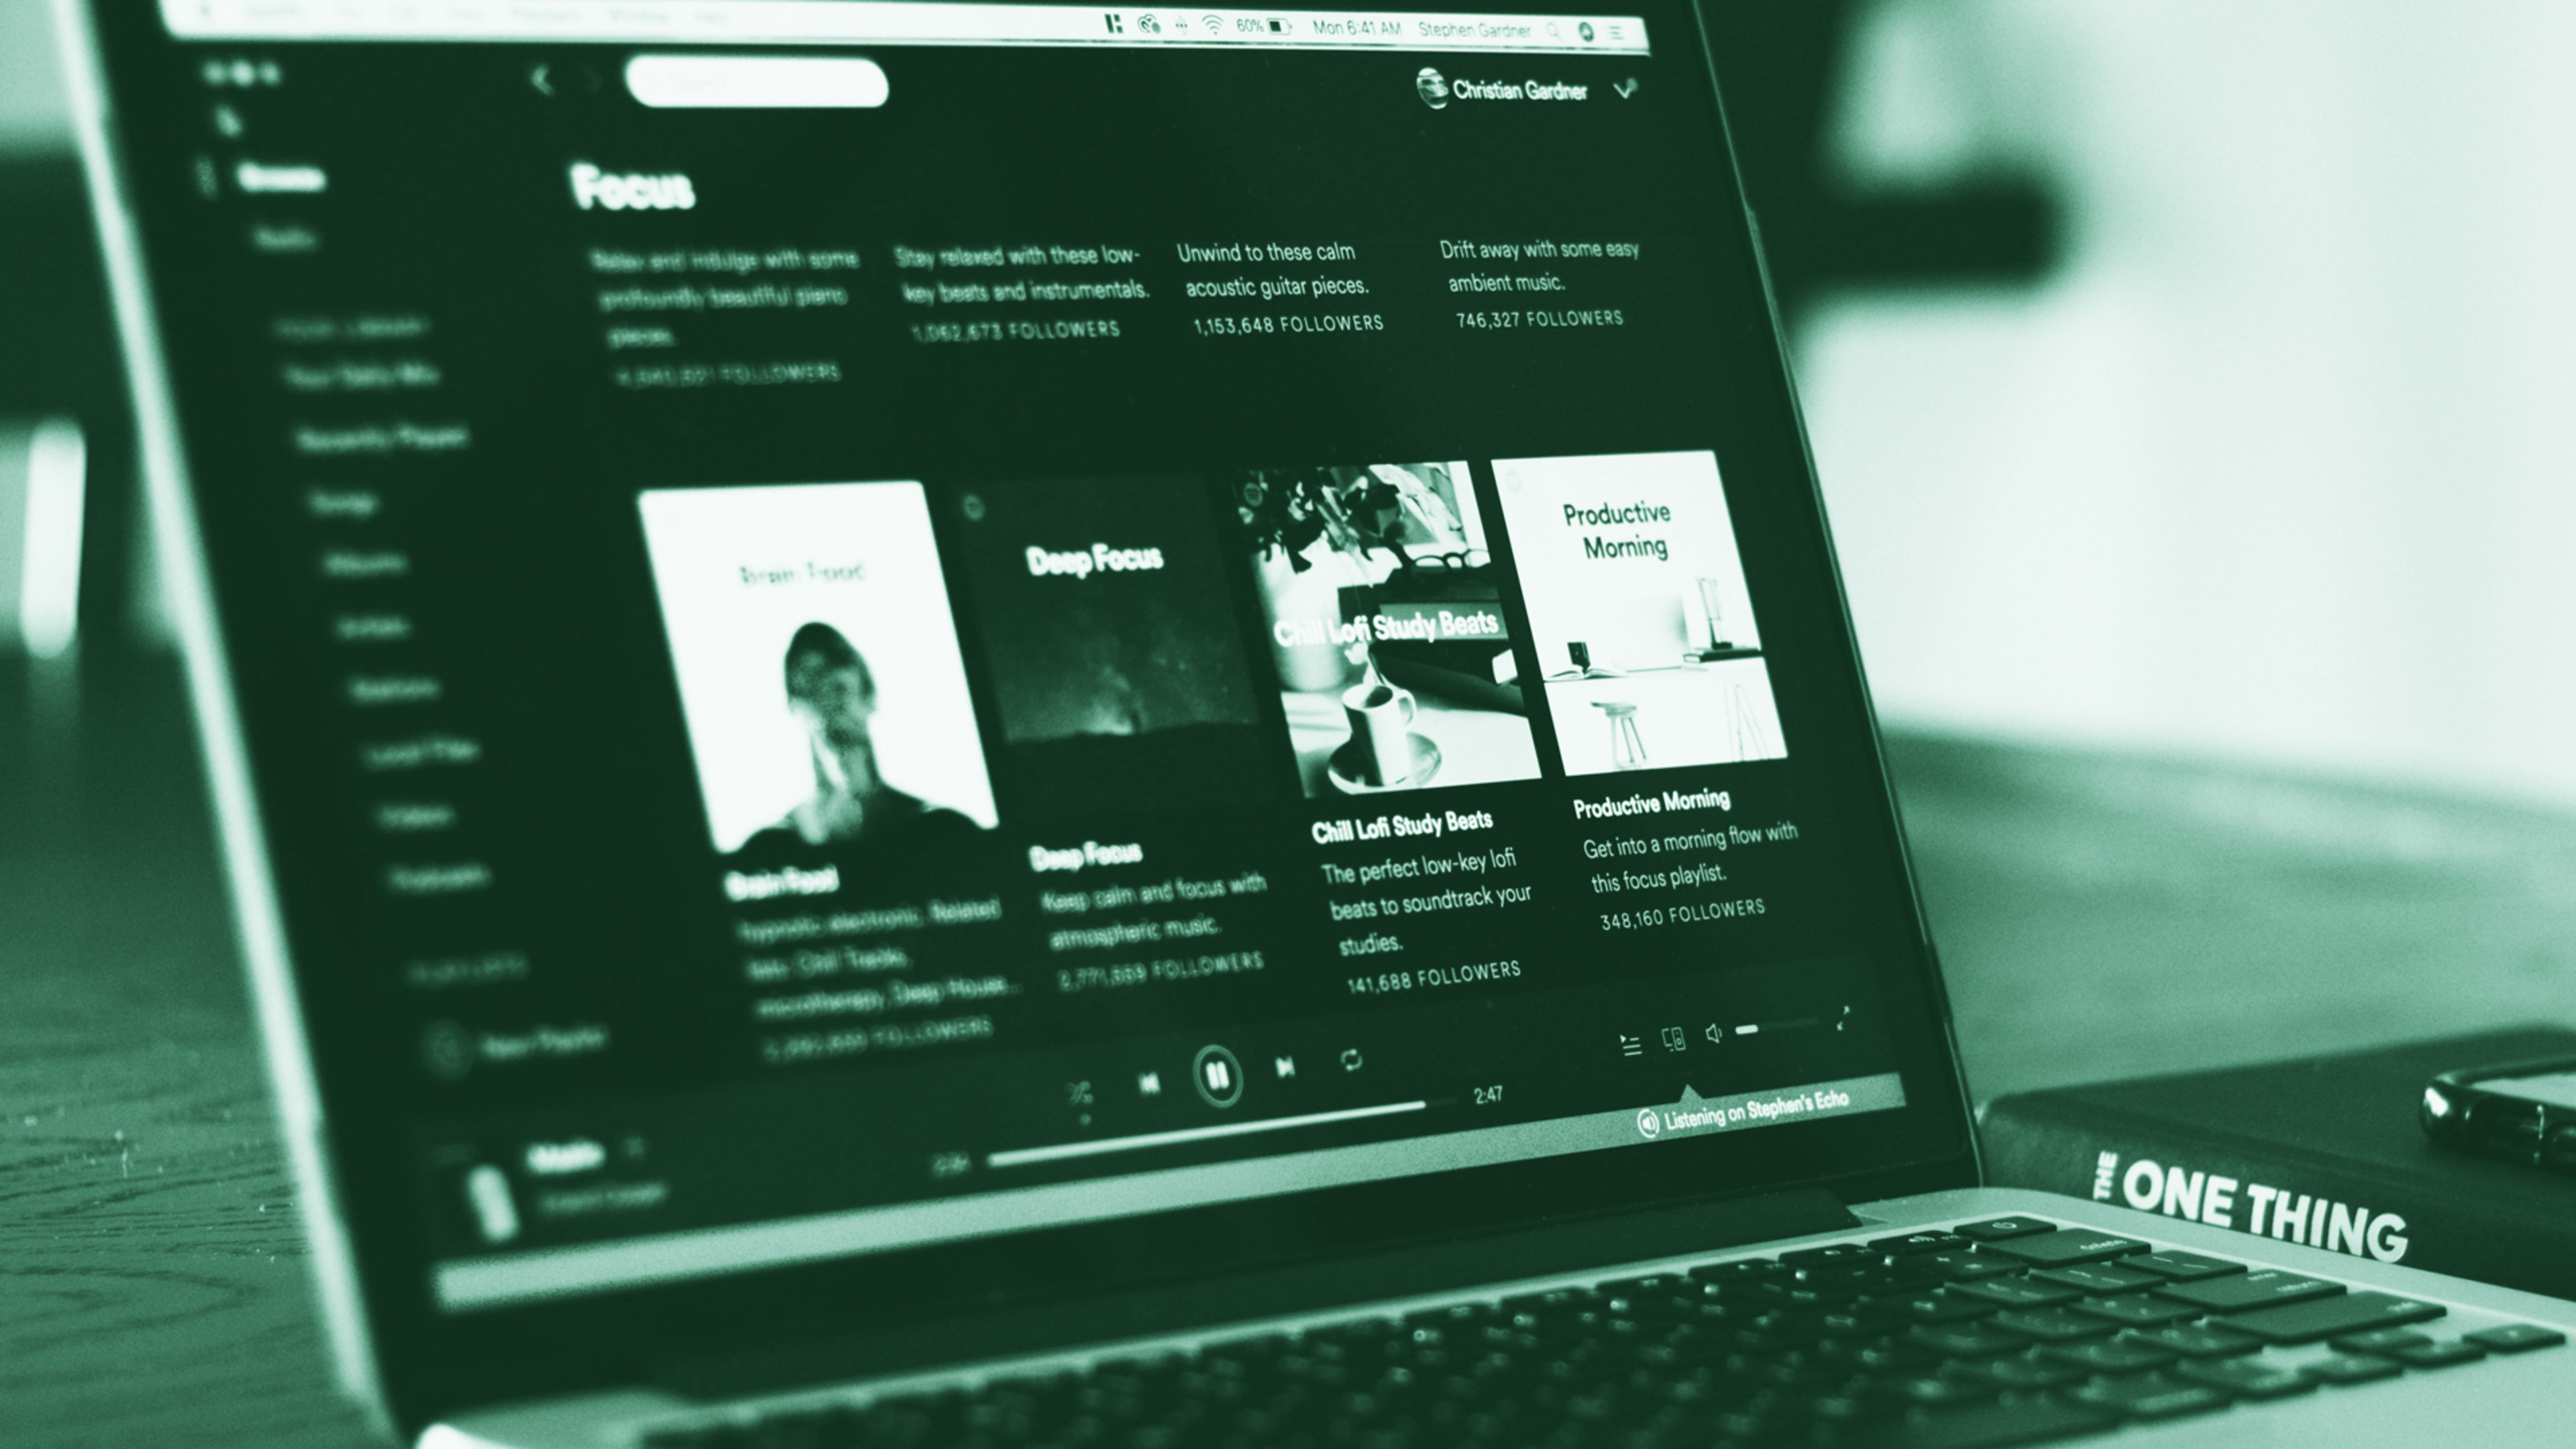 Spotify Q1 2020 monthly active users soar as pandemic keeps people at home consuming content